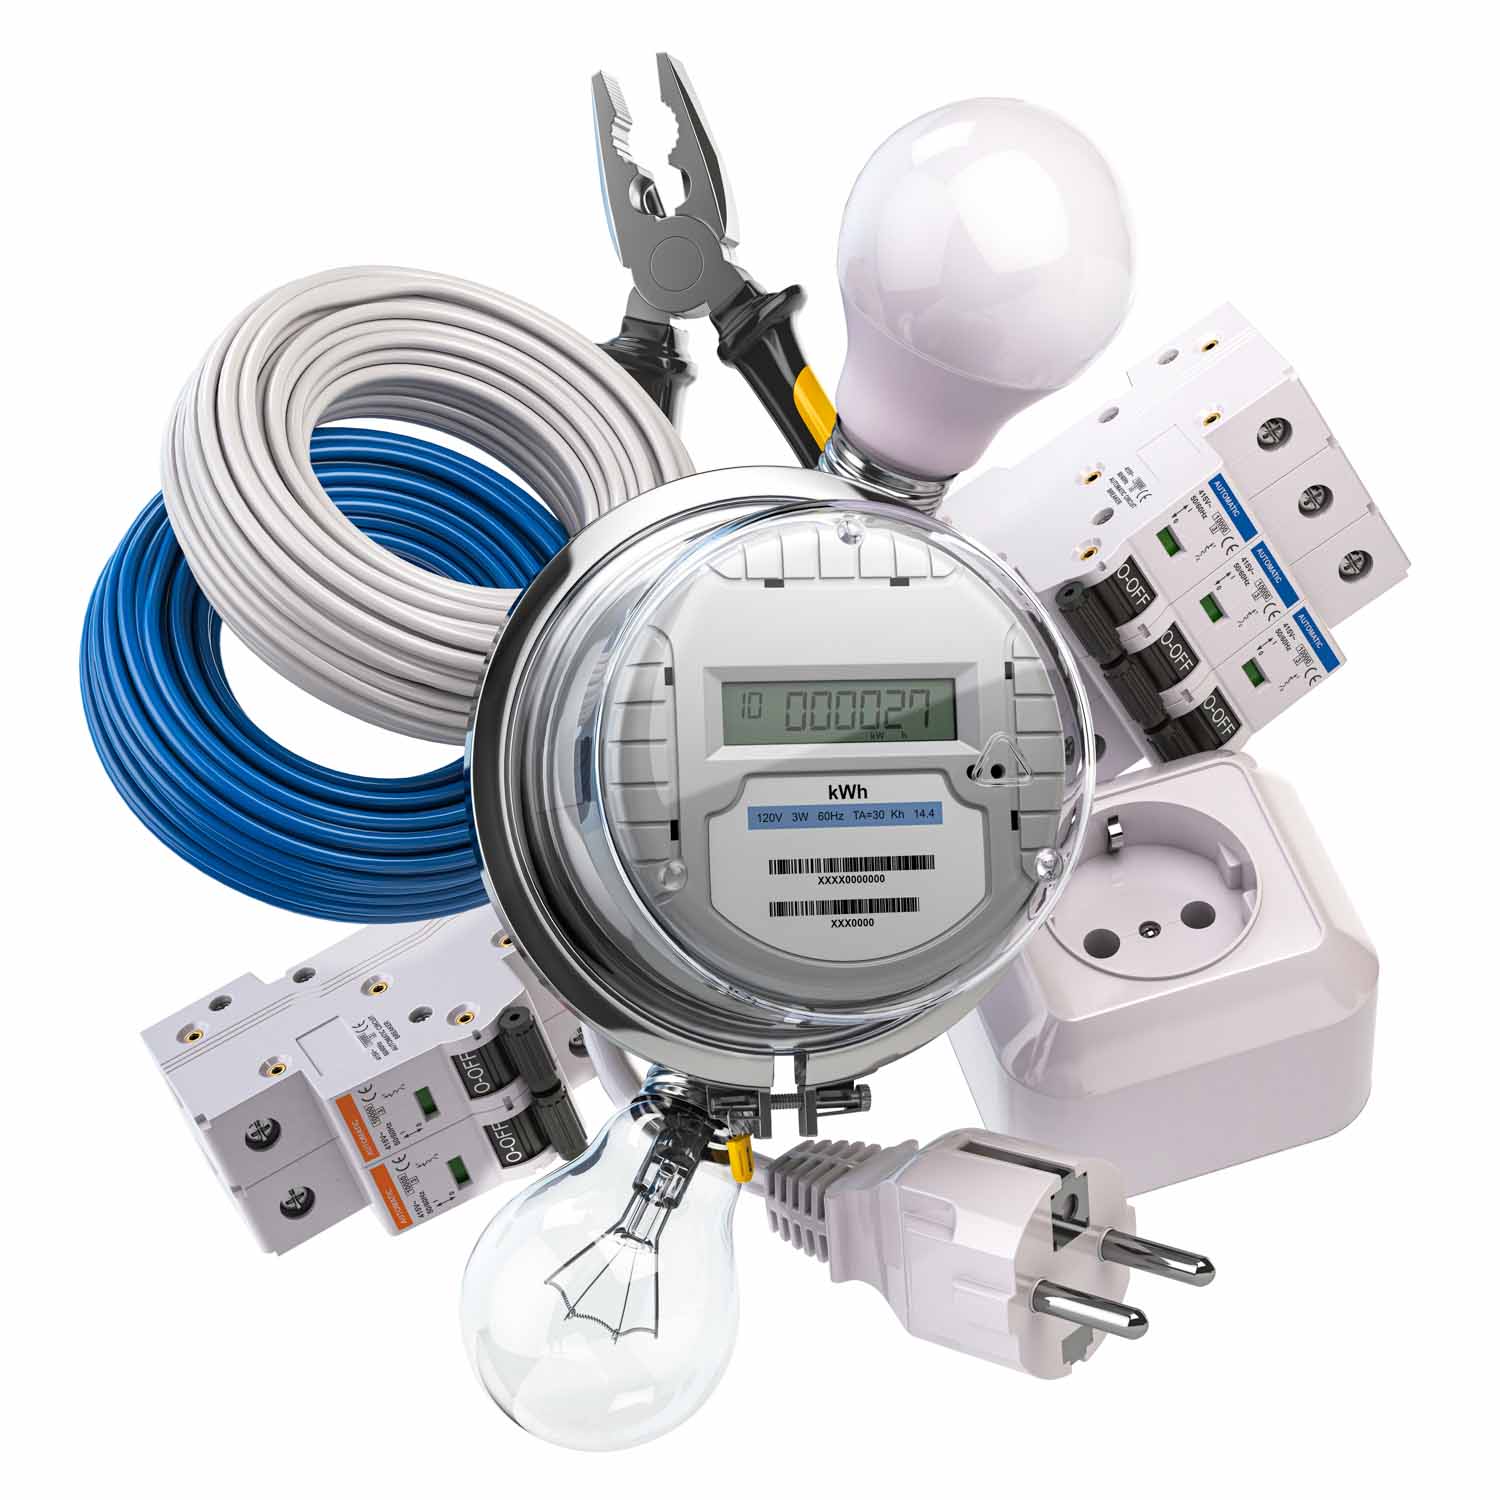 Low voltage equipment and systems